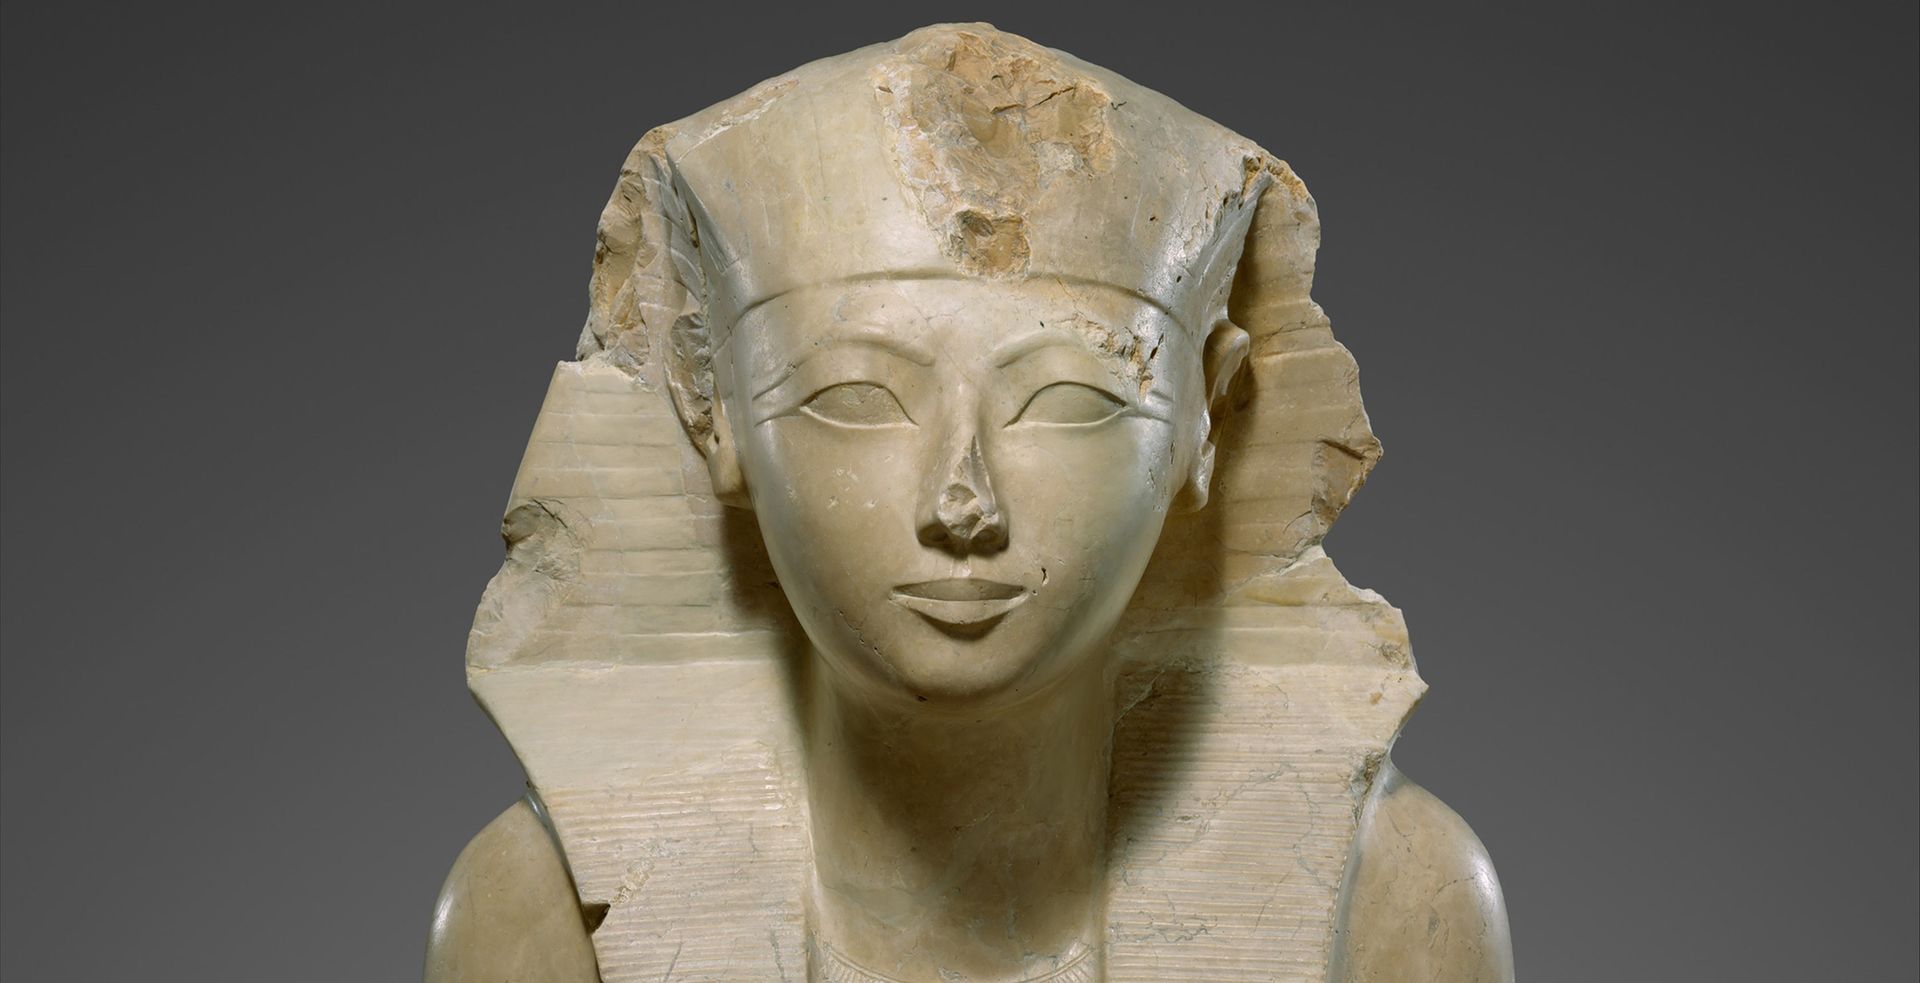 Detail of an ancient Egyptian limestone statue of Hatshepsut